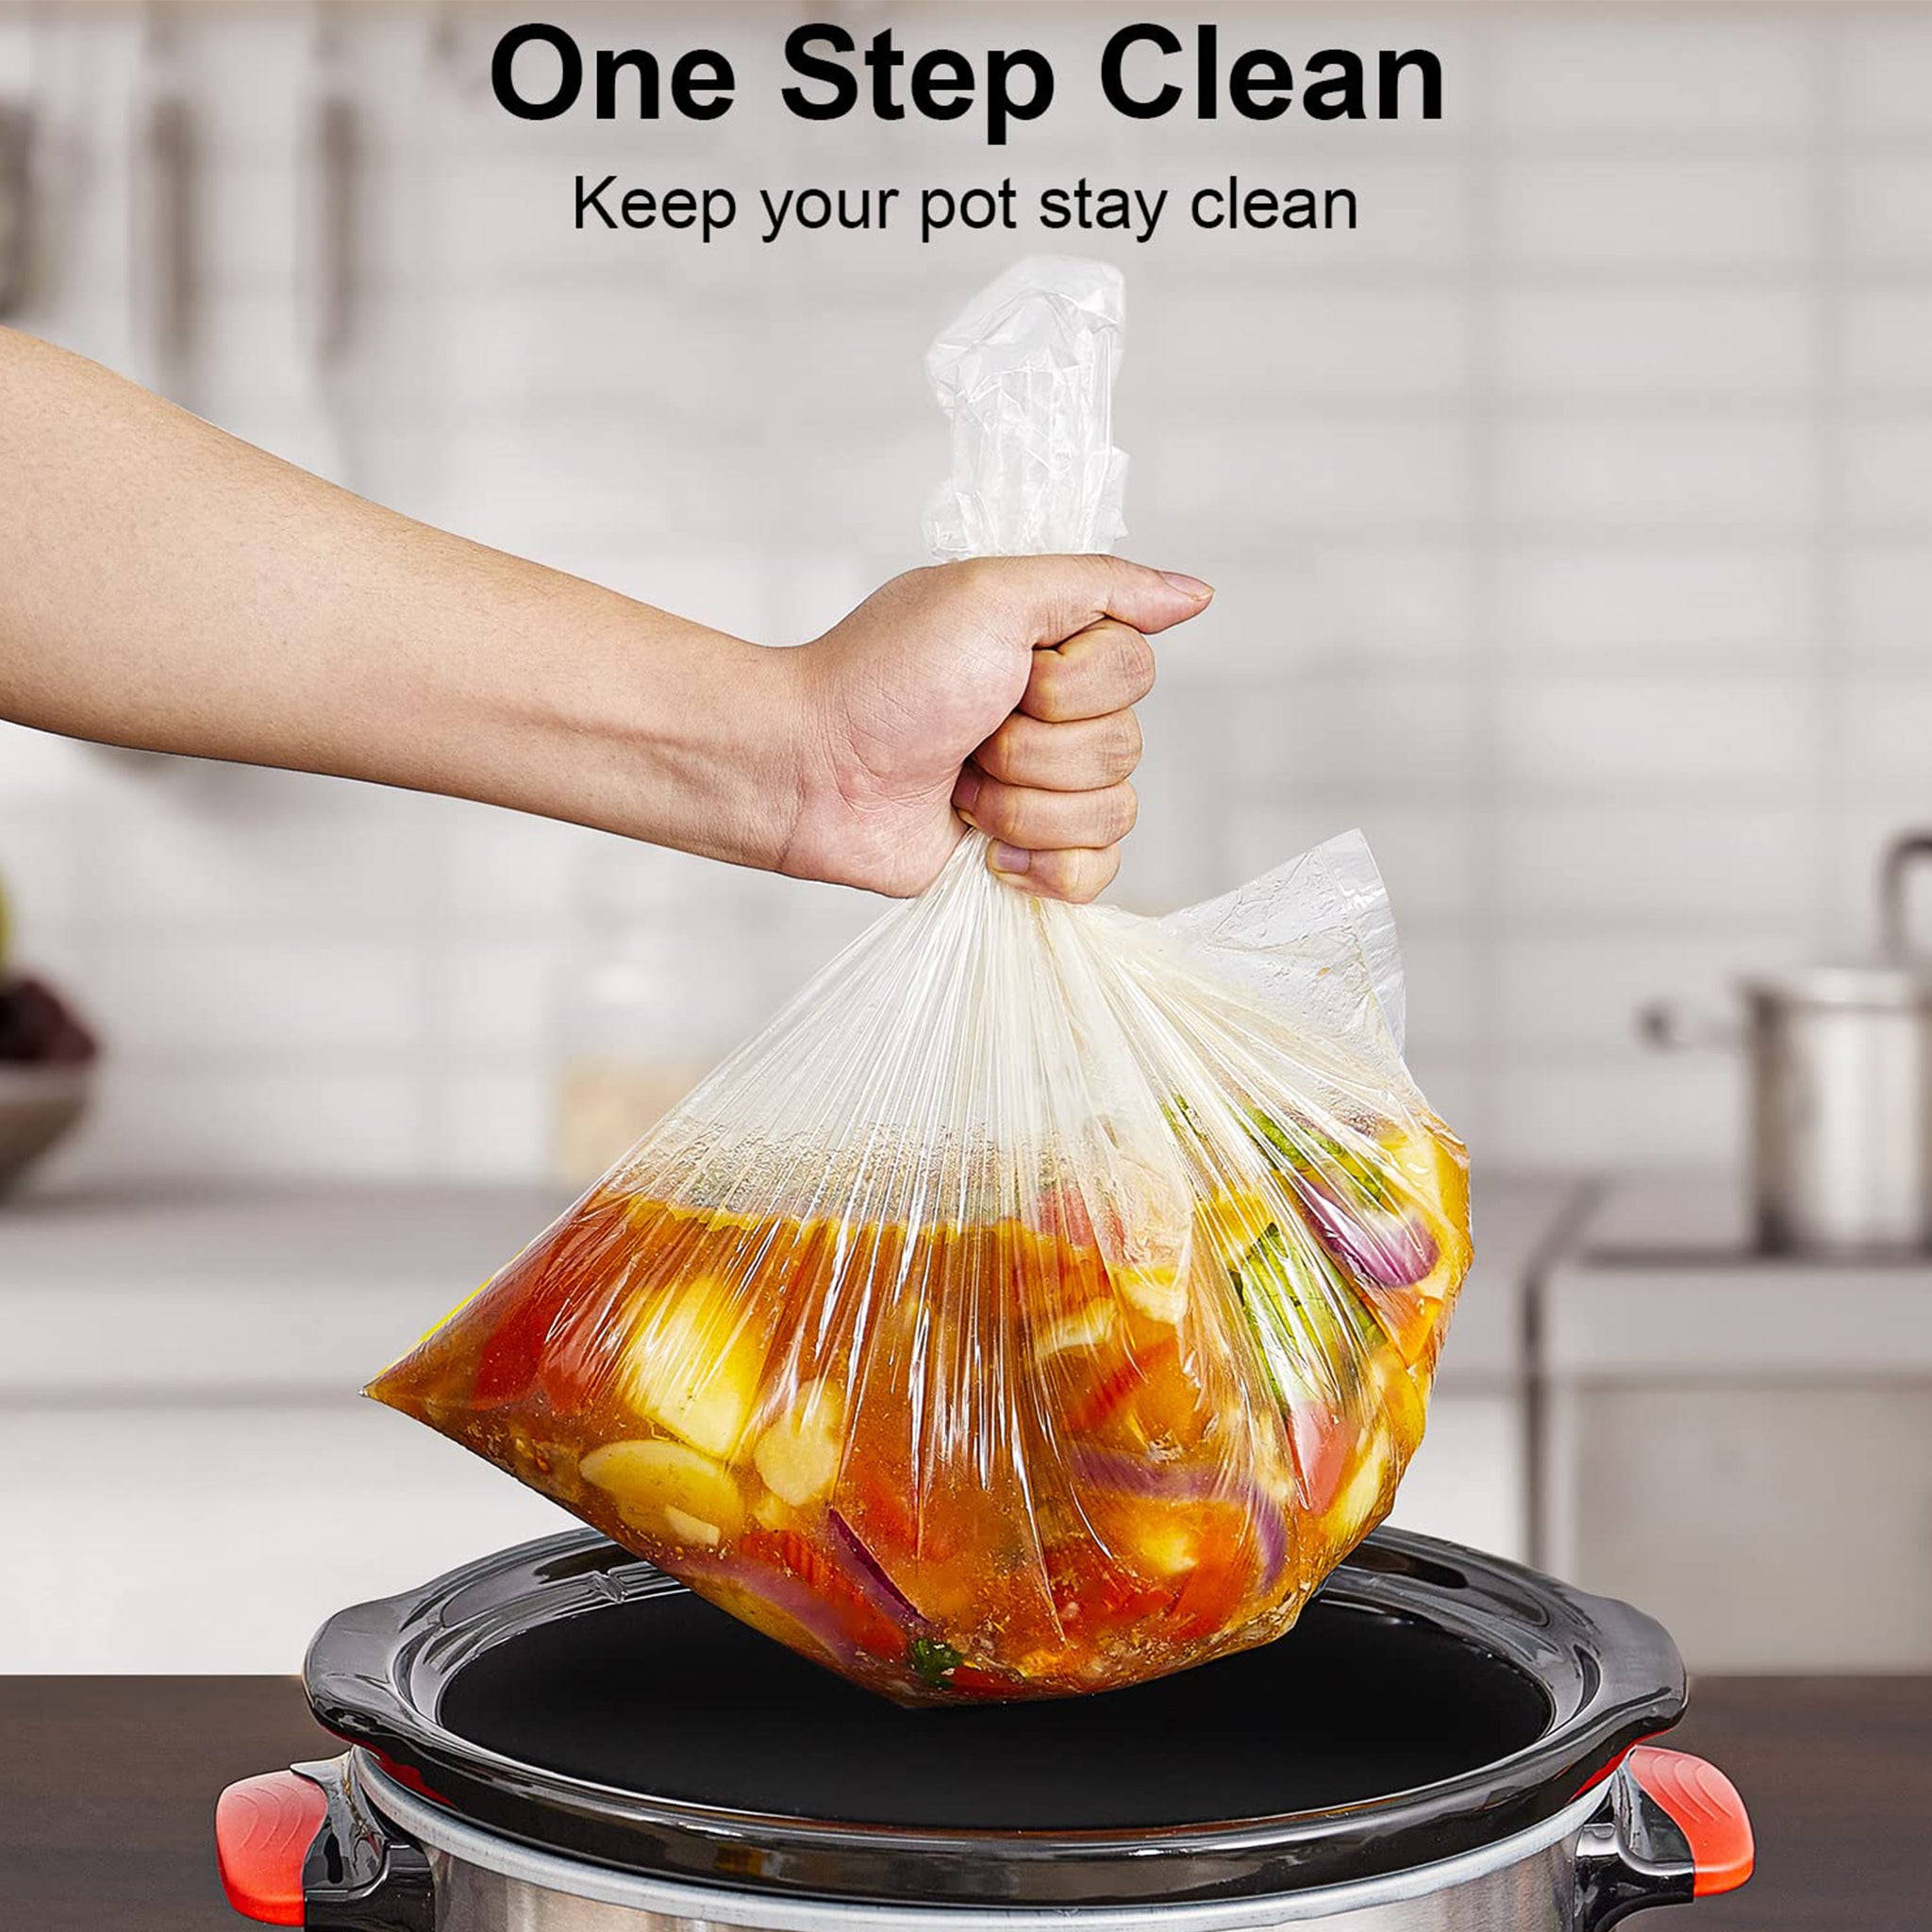 SMARTAKE Slow Cooker Liners, 13 × 21 Inches Disposable Cooking Bags, Easy Clean-Up Plastic Bags, Fit 3qt to 8qt, for Slow Cooker, Crockpot, Aluminum